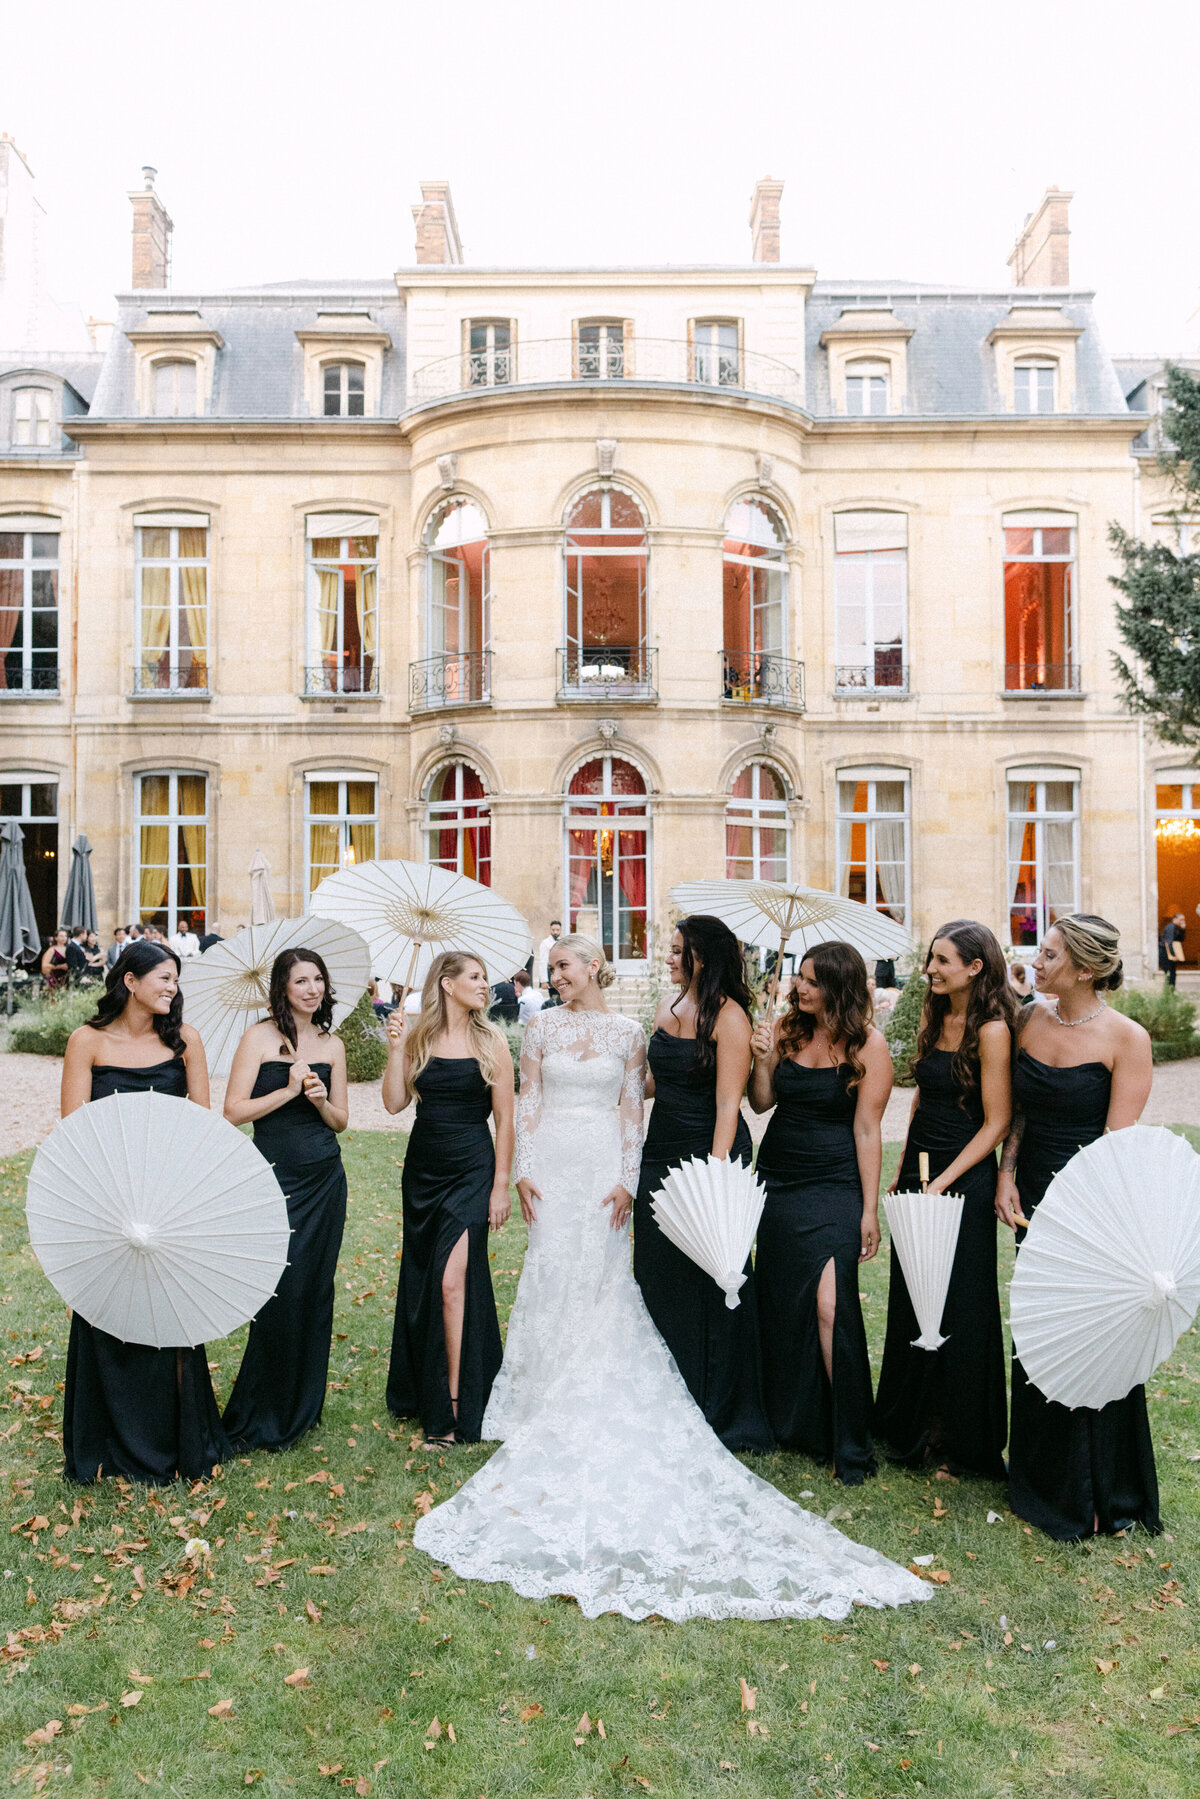 Jennifer Fox Weddings English speaking wedding planning & design agency in France crafting refined and bespoke weddings and celebrations Provence, Paris and destination wd652